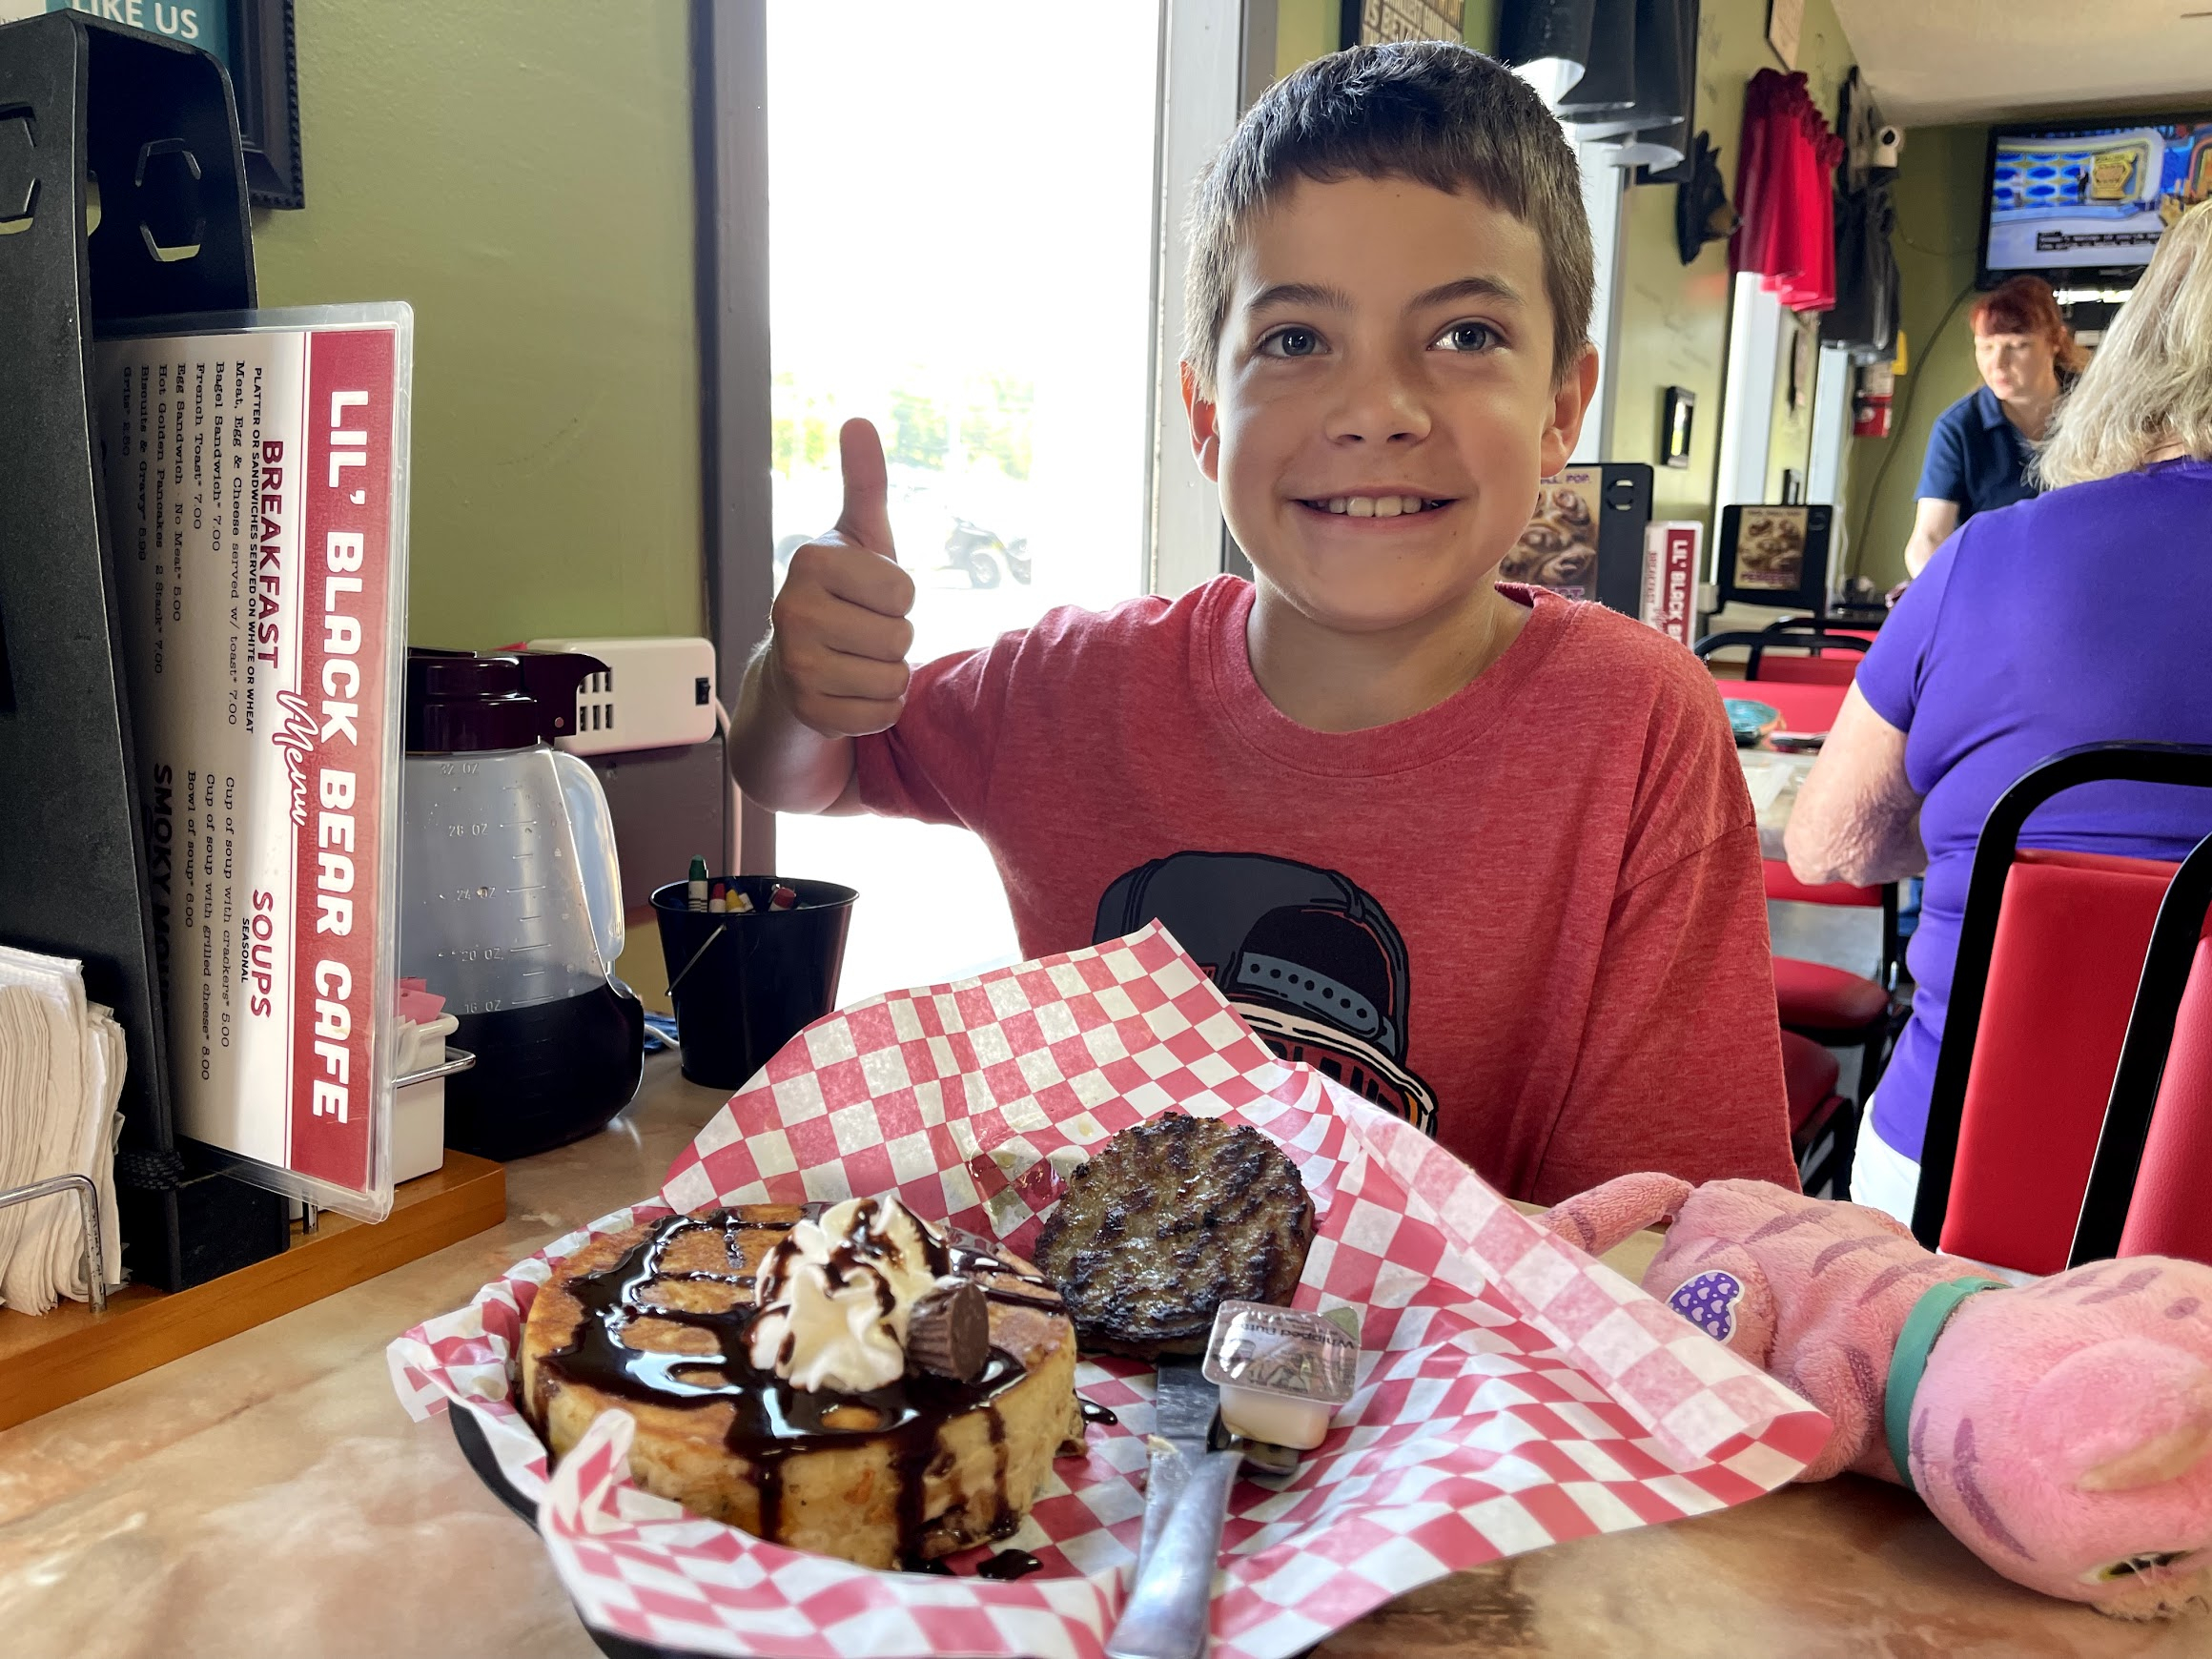 Pigeon Forge - Lil Black Bear Cafe - Timothy and Reese's pancakes 2021-05